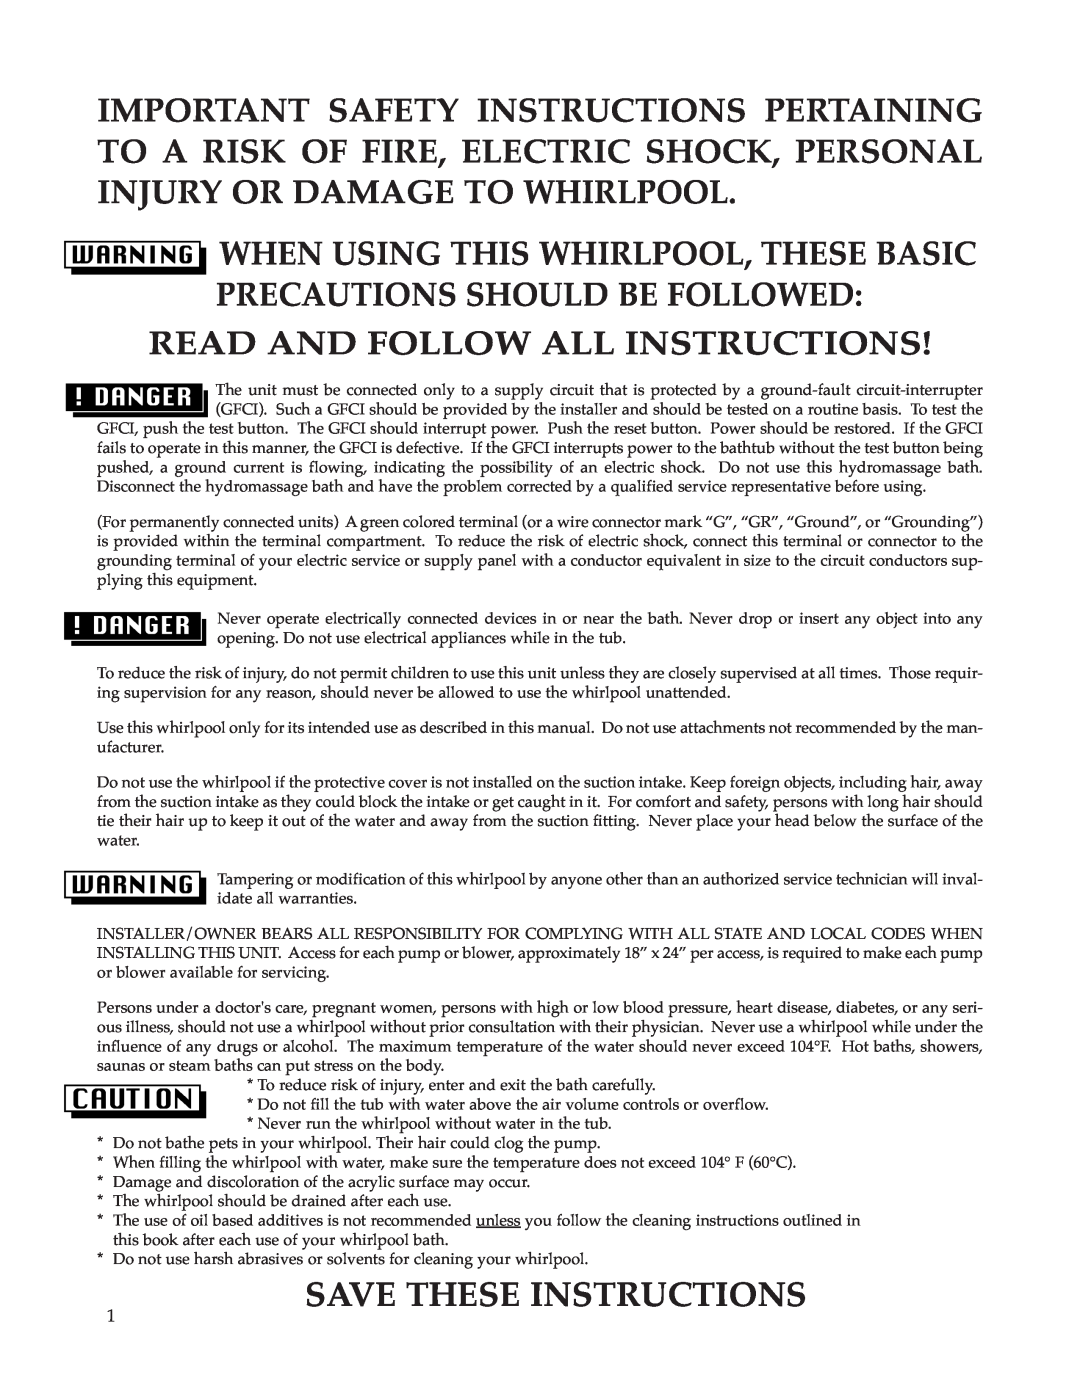 Whirlpool Hot Tub When Using This Whirlpool, These Basic Precautions Should Be Followed, Read And Follow All Instructions 